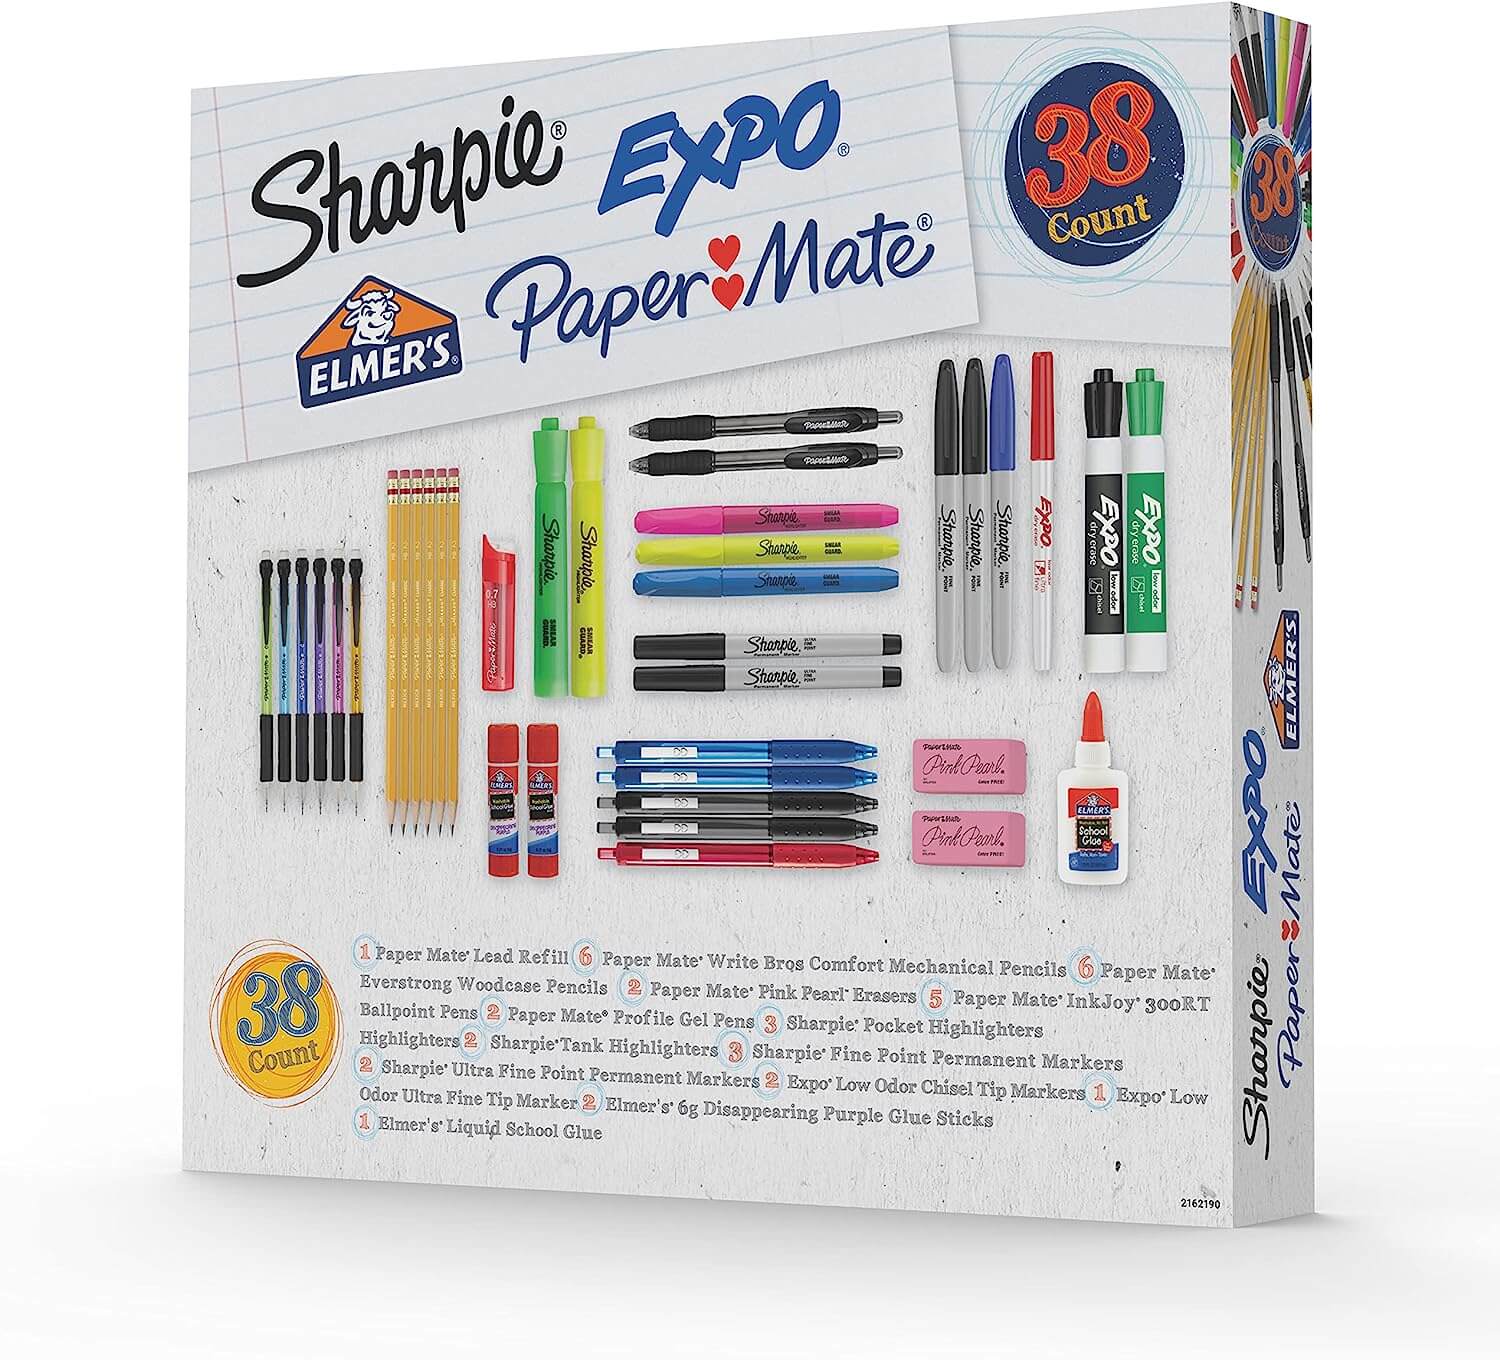 A product image of a teacher supply kit - a crucial essential for beginner teachers.